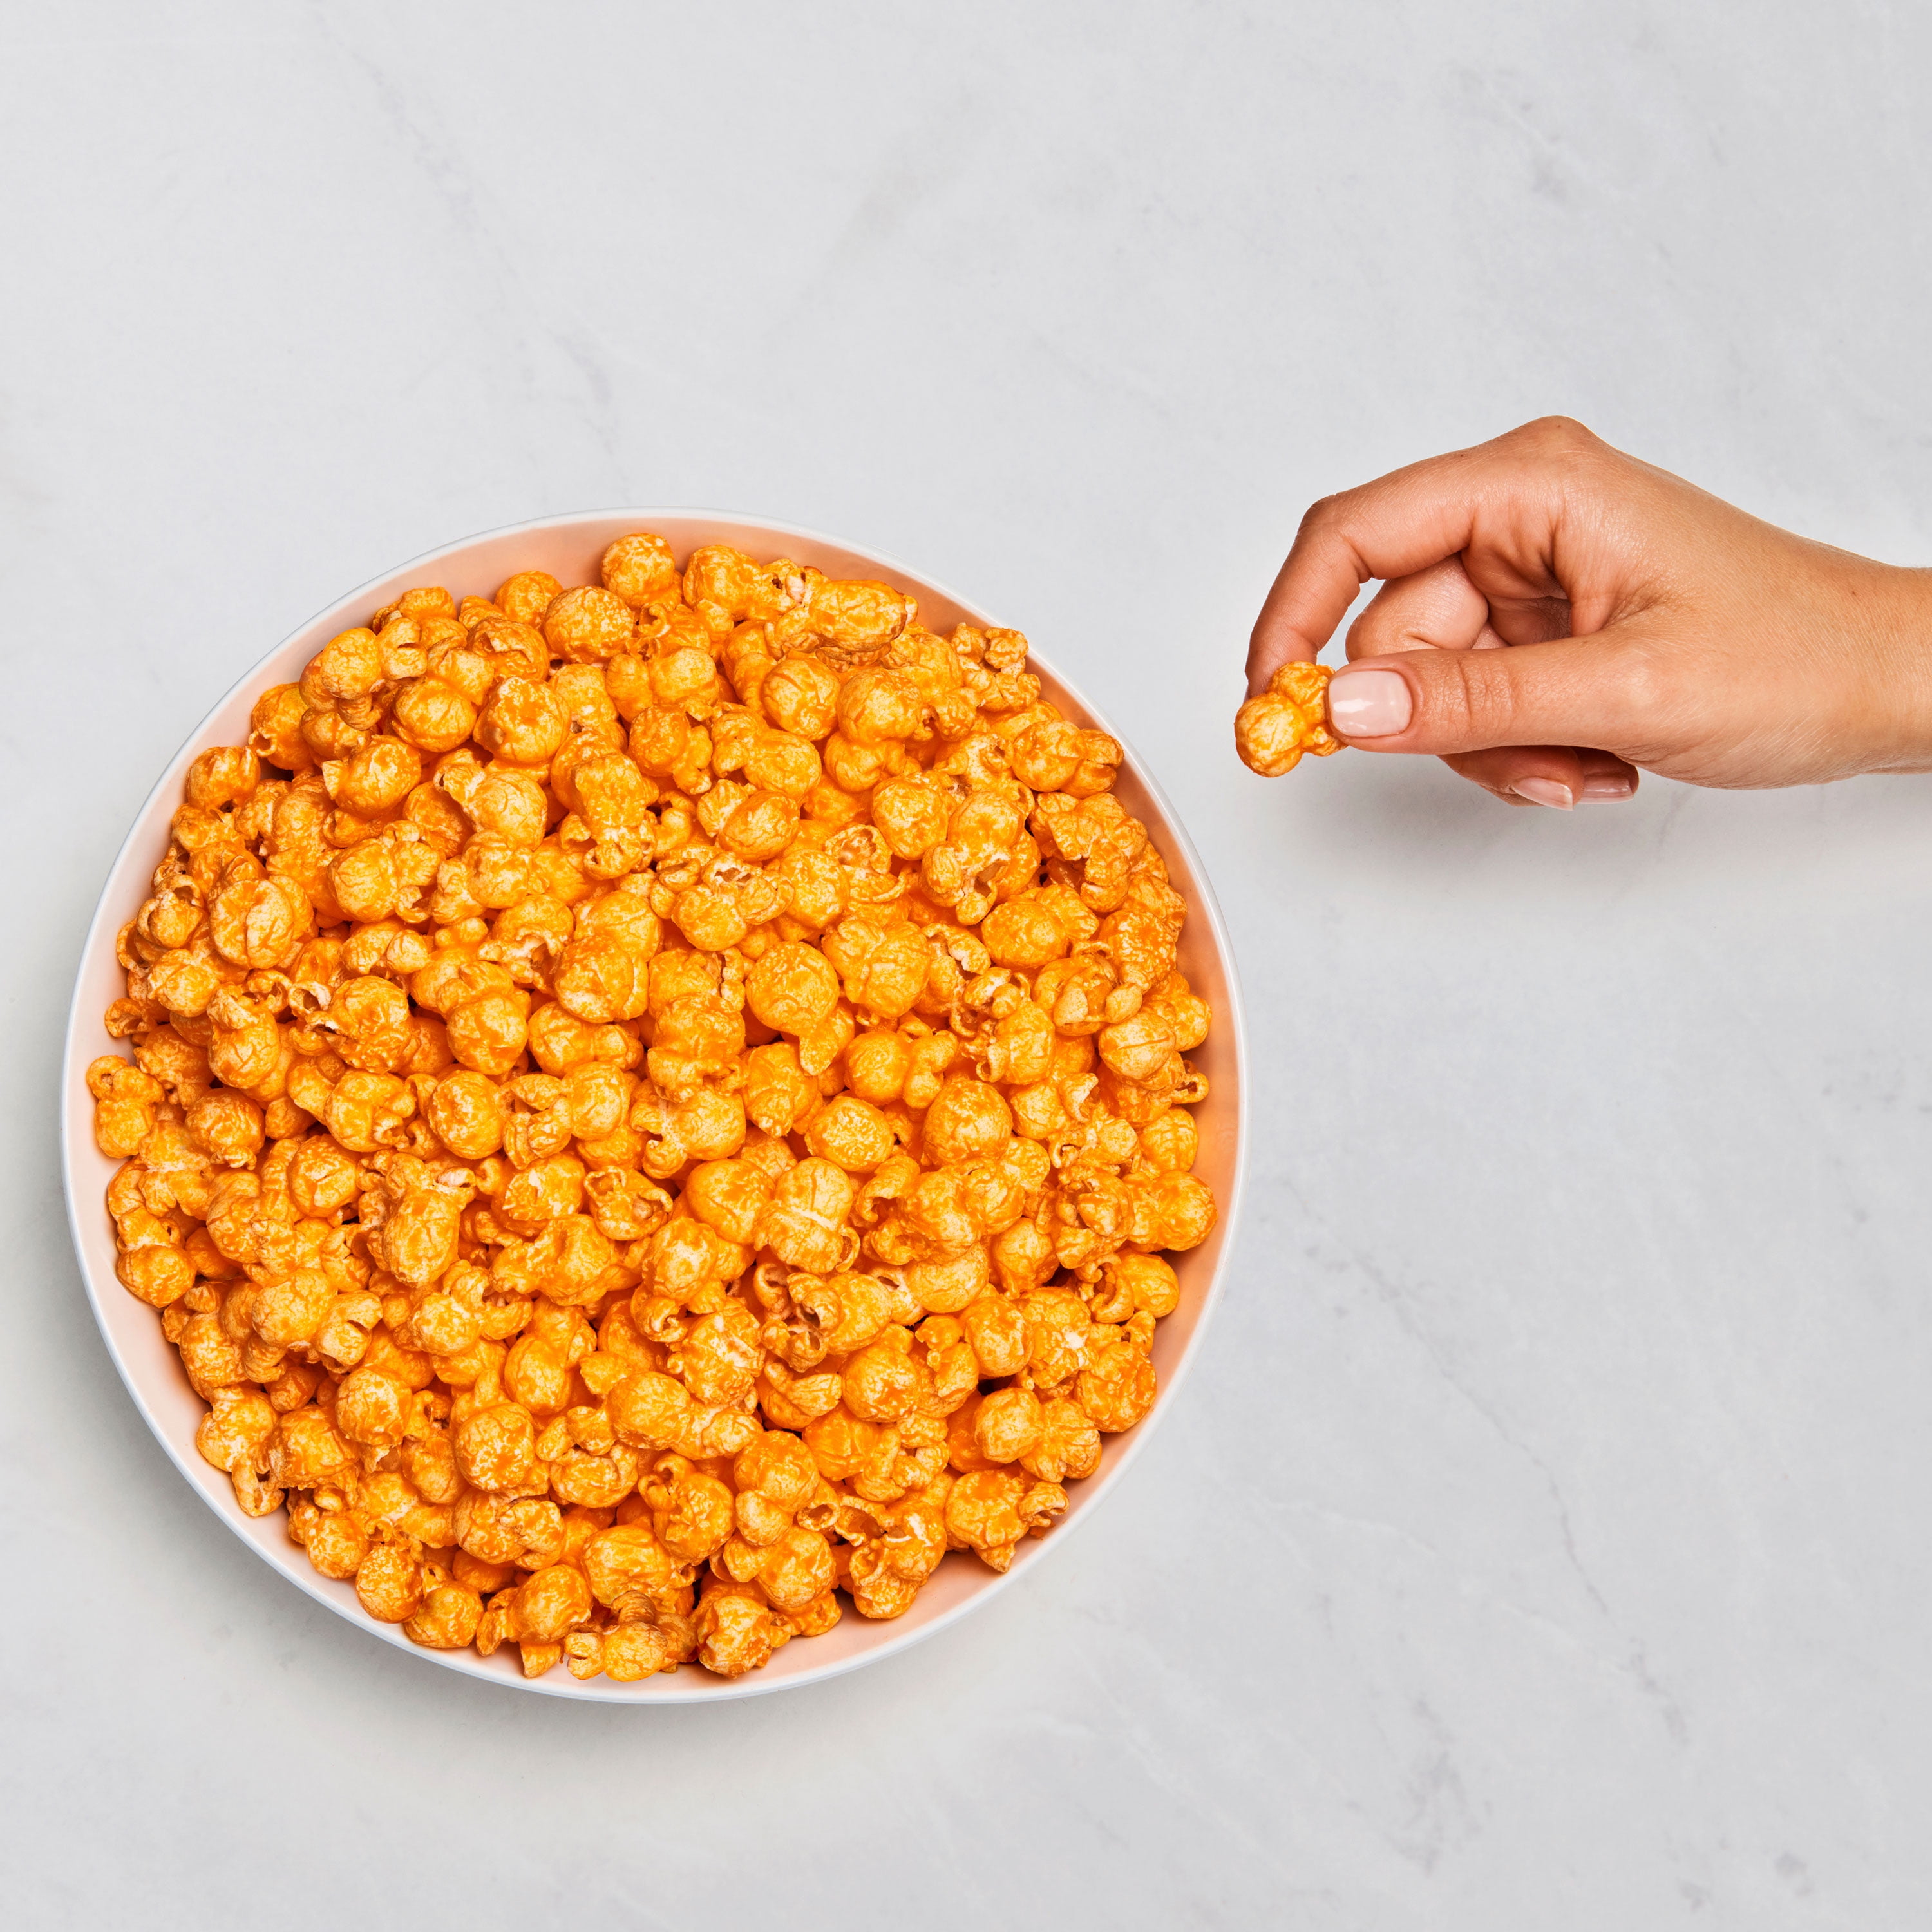 Cheetos Just Introduced a Cheddar Jalapeño Popcorn Flavor to Bring